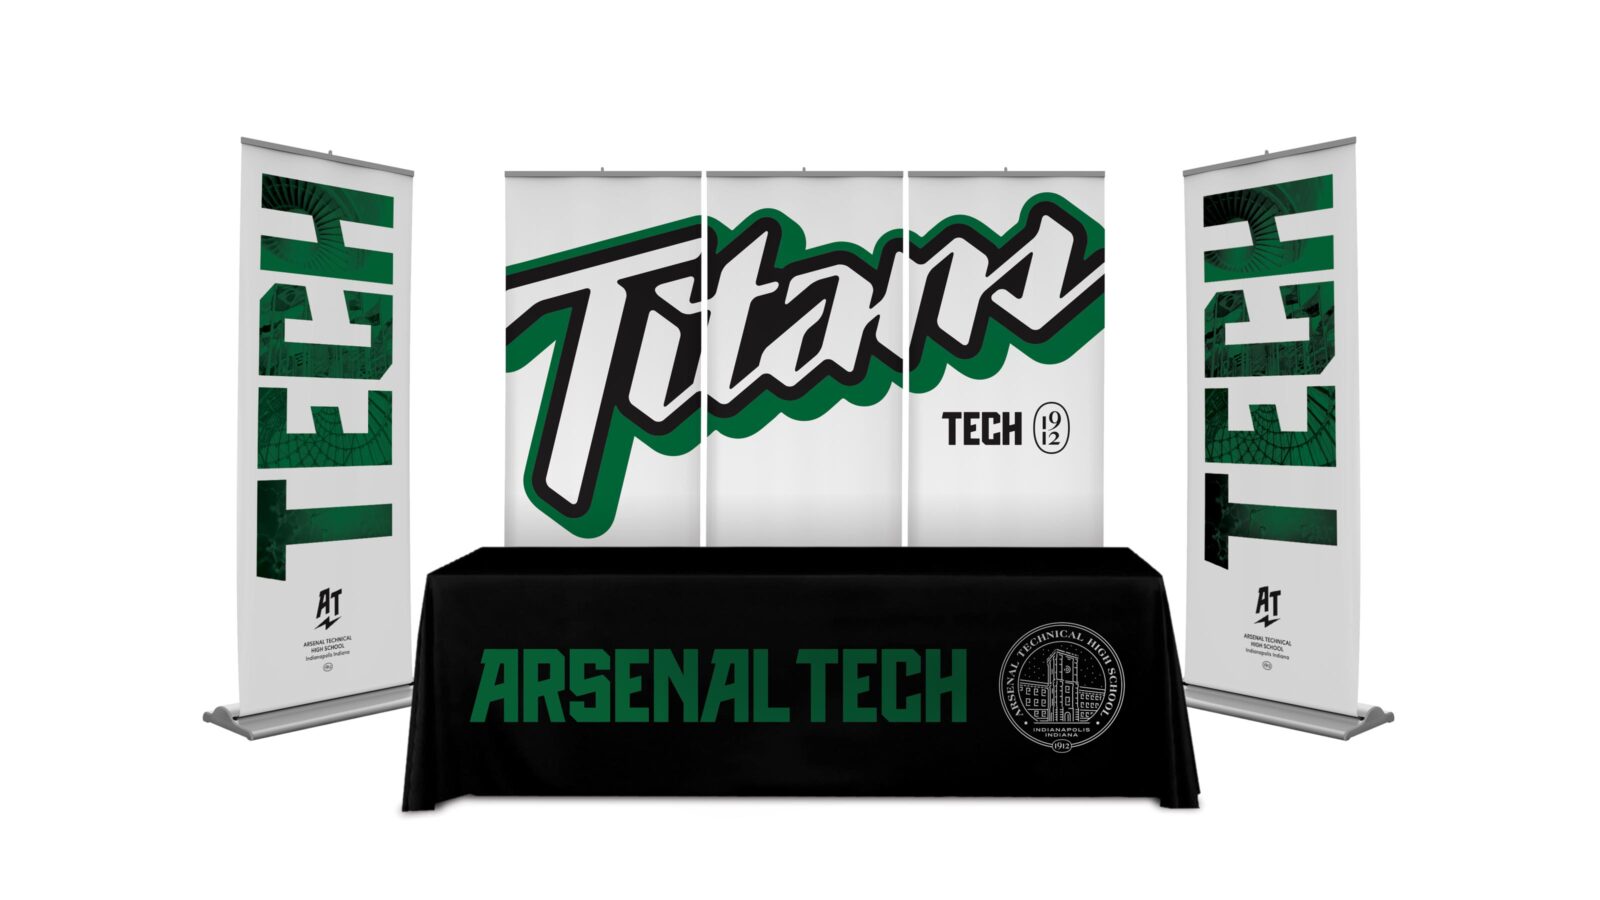 Arsenal Tech Branded Booth